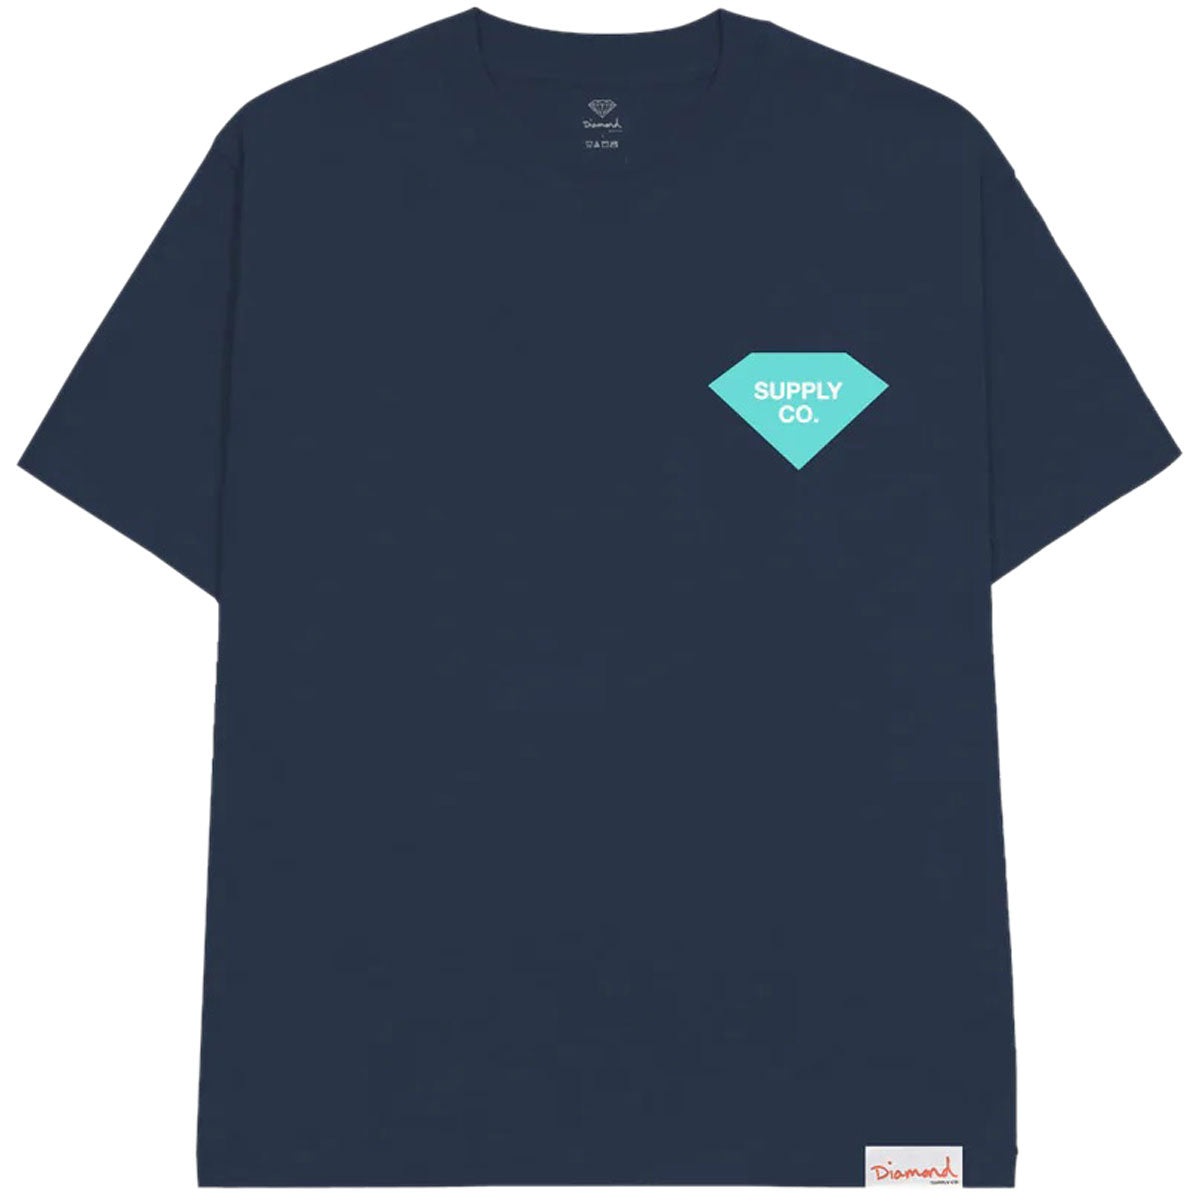 Diamond Supply Co. Silhouette Supply Co. T-Shirt - Navy image 1